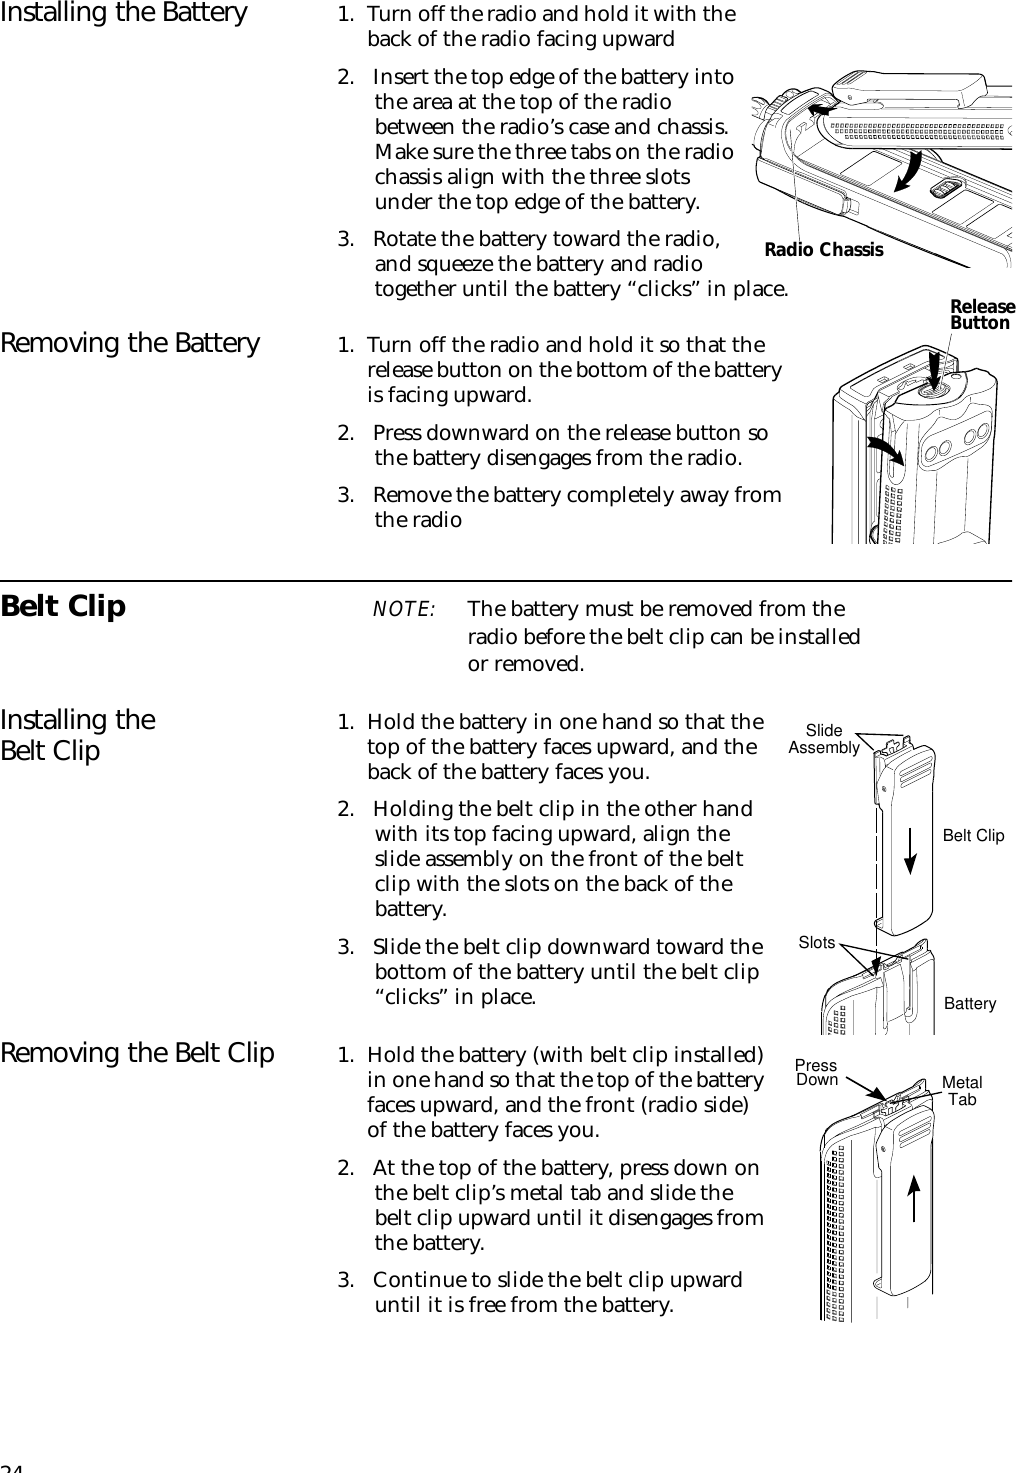 24Installing the Battery 1. Turn off the radio and hold it with the back of the radio facing upward2. Insert the top edge of the battery into the area at the top of the radio between the radio’s case and chassis. Make sure the three tabs on the radio chassis align with the three slots under the top edge of the battery.3. Rotate the battery toward the radio, and squeeze the battery and radio together until the battery “clicks” in place.Removing the Battery 1. Turn off the radio and hold it so that the release button on the bottom of the battery is facing upward.2. Press downward on the release button so the battery disengages from the radio.3. Remove the battery completely away from the radioBelt Clip NOTE: The battery must be removed from the radio before the belt clip can be installed or removed.Installing the Belt Clip 1. Hold the battery in one hand so that the top of the battery faces upward, and the back of the battery faces you.2. Holding the belt clip in the other hand with its top facing upward, align the slide assembly on the front of the belt clip with the slots on the back of the battery.3. Slide the belt clip downward toward the bottom of the battery until the belt clip “clicks” in place.Removing the Belt Clip 1. Hold the battery (with belt clip installed) in one hand so that the top of the battery faces upward, and the front (radio side) of the battery faces you.2. At the top of the battery, press down on the belt clip’s metal tab and slide the belt clip upward until it disengages from the battery.3. Continue to slide the belt clip upward until it is free from the battery.Slide AssemblySlotsBelt ClipBatteryMetalTabPressDownRadio ChassisReleaseButton